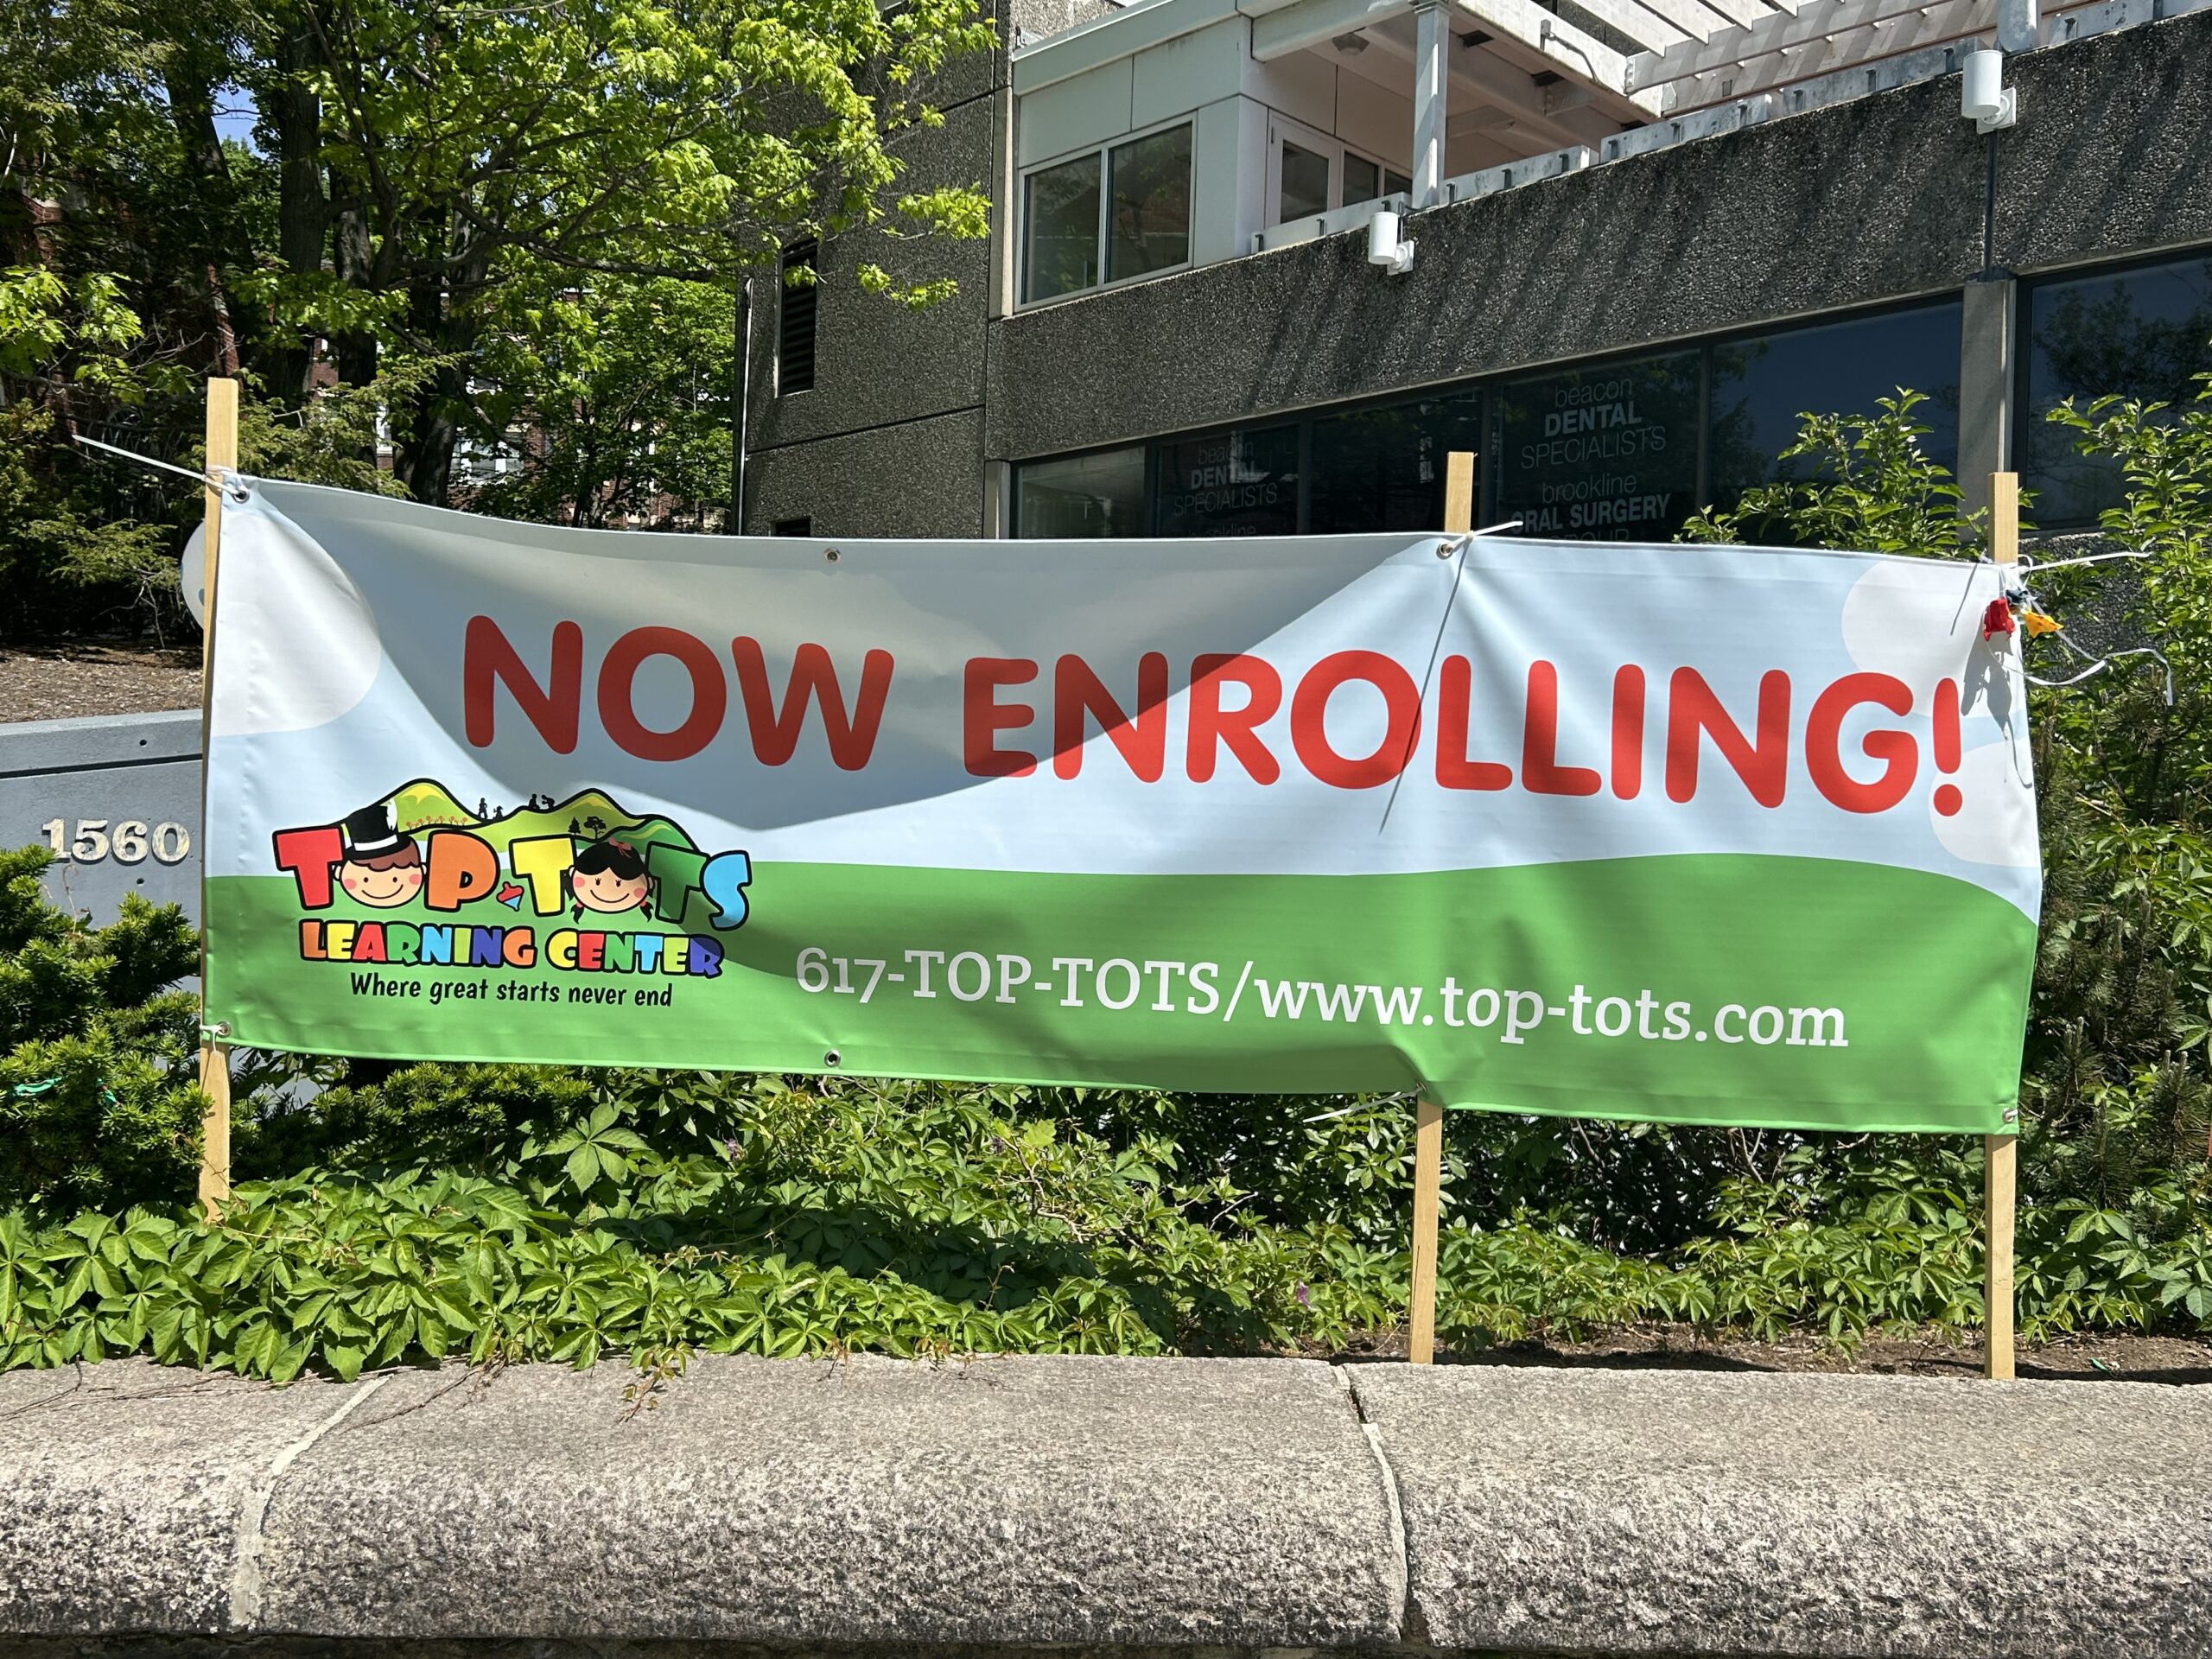 Come by 1560 Beacon Street to enroll your TOP TOT in our inaugural class